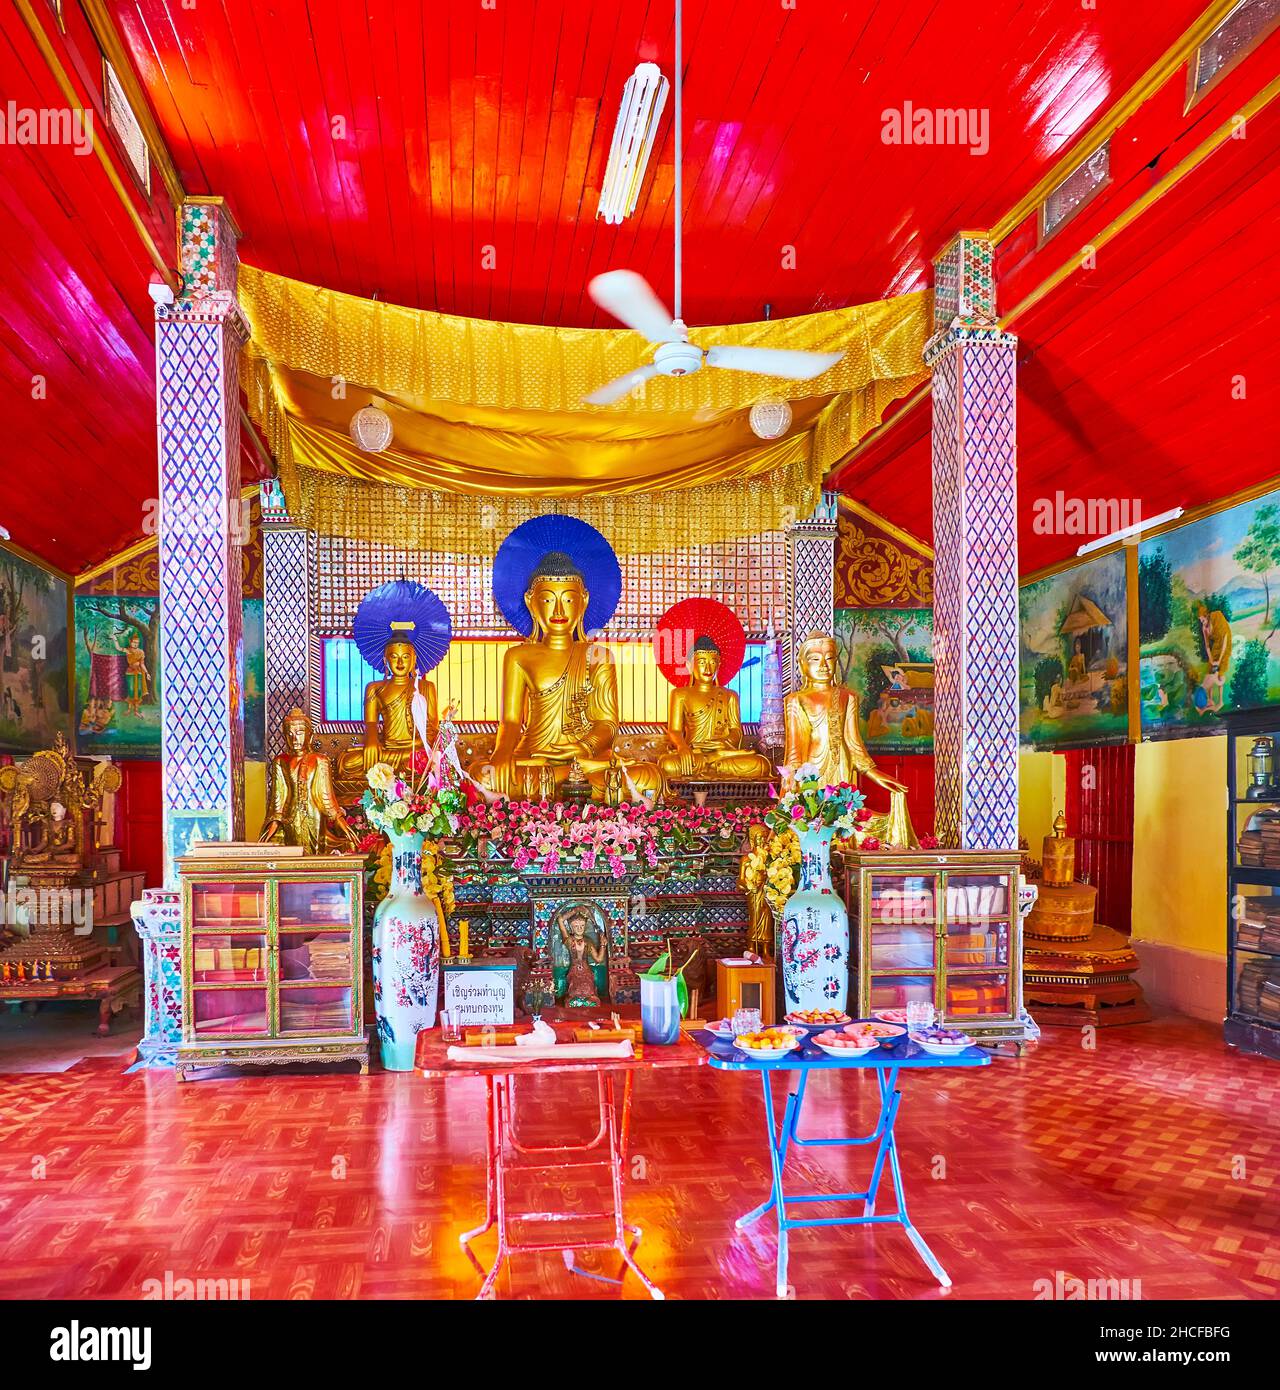 CHIANG MAI, THAILAND - MAY 4, 2019: Interior of Viharn of Wat Sai Moon Myanmar temple with ornate altar, decorated with pillars and golden silk canopy Stock Photo